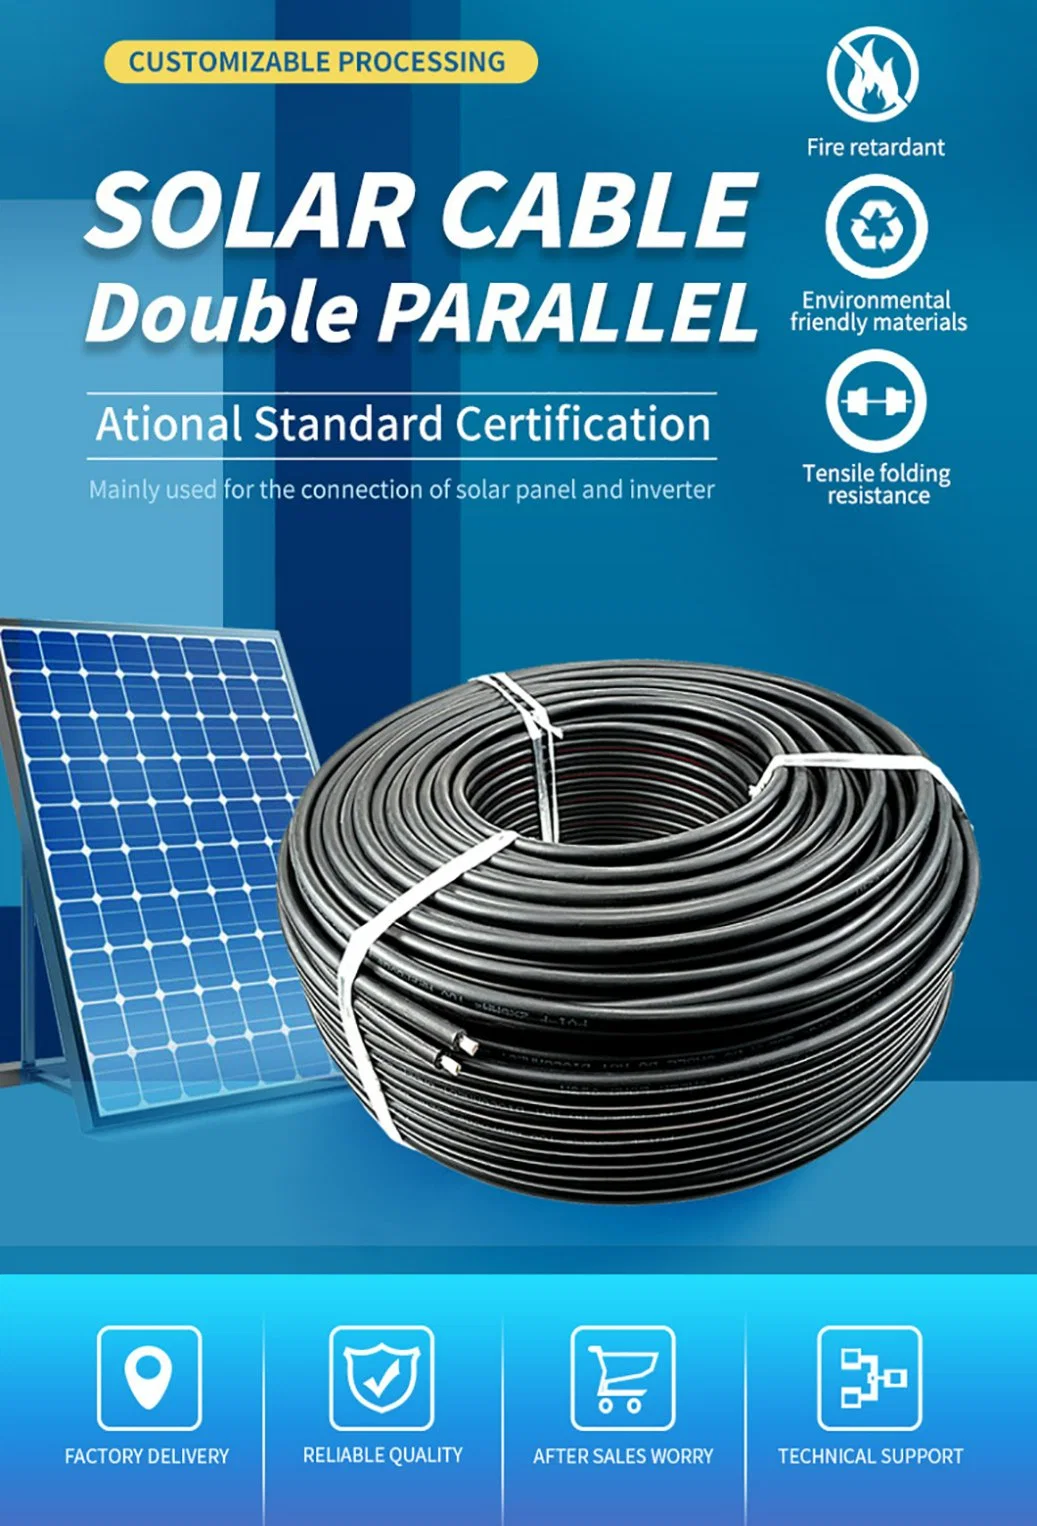 TUV Certification 1000V DC Copper Twin Core PV1-F 2X10mm2 10 mm Electric Wire PV Solar Cable